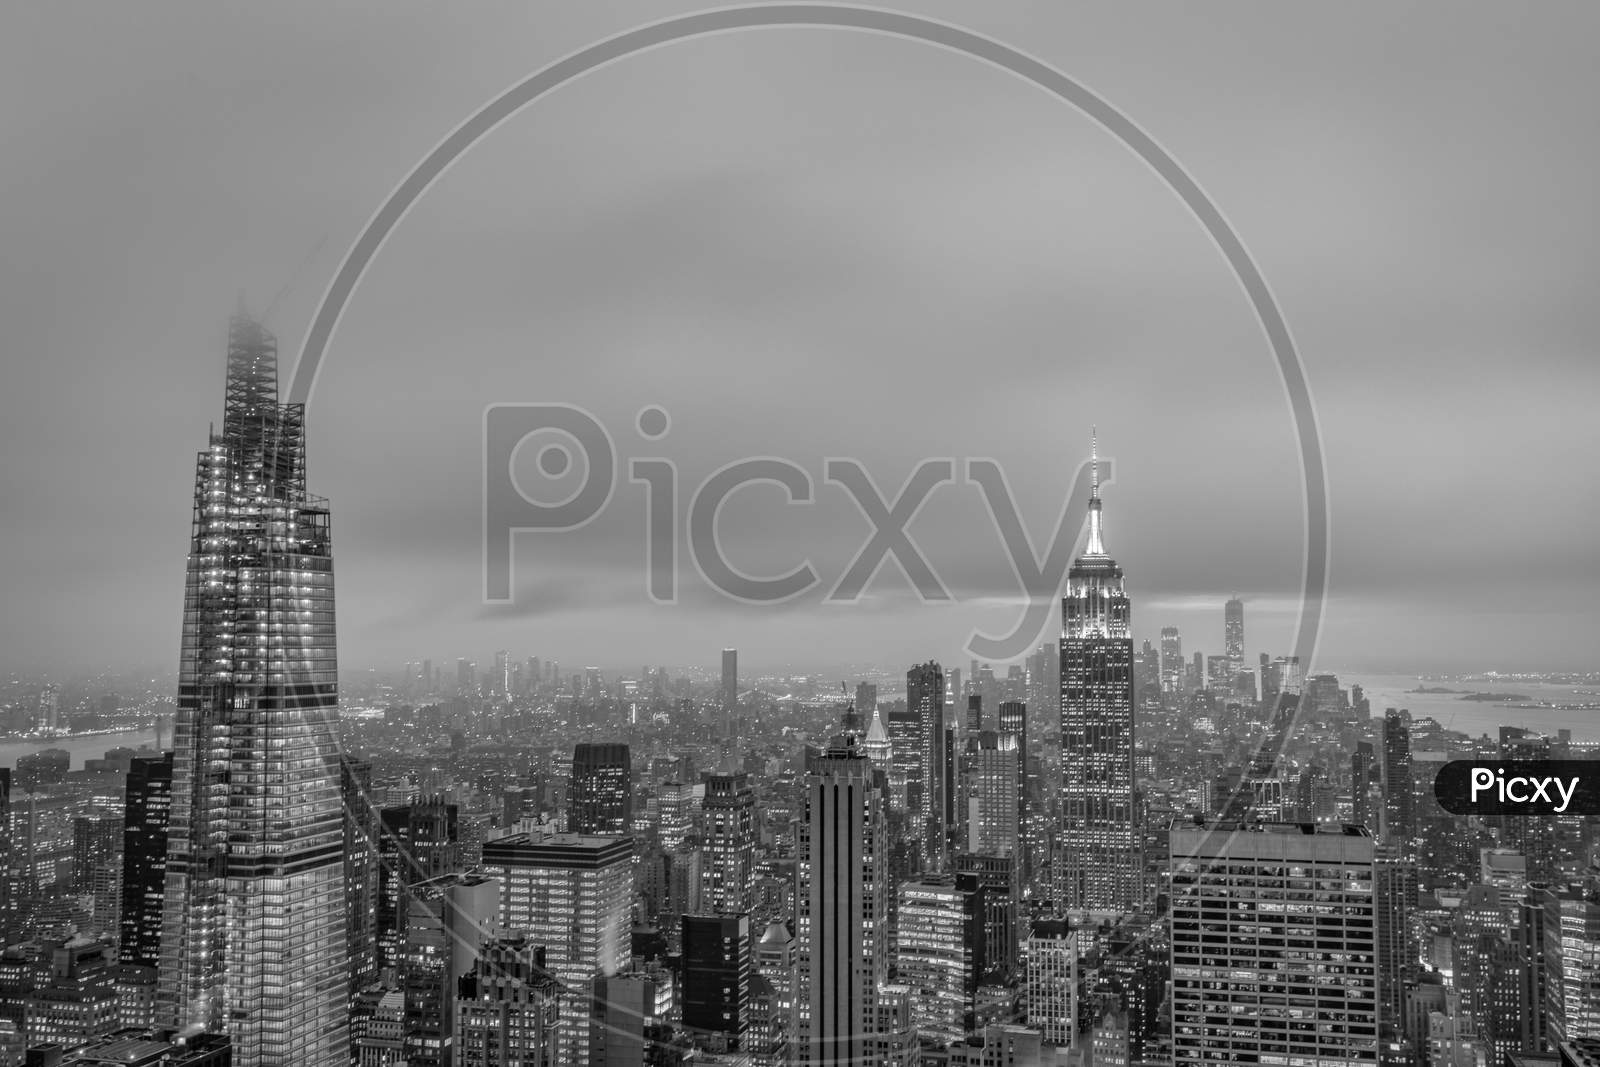 New York skyline from the top of  the Rock (Rockefeller Center)sunset view in Winter with clouds in the sky in black and white